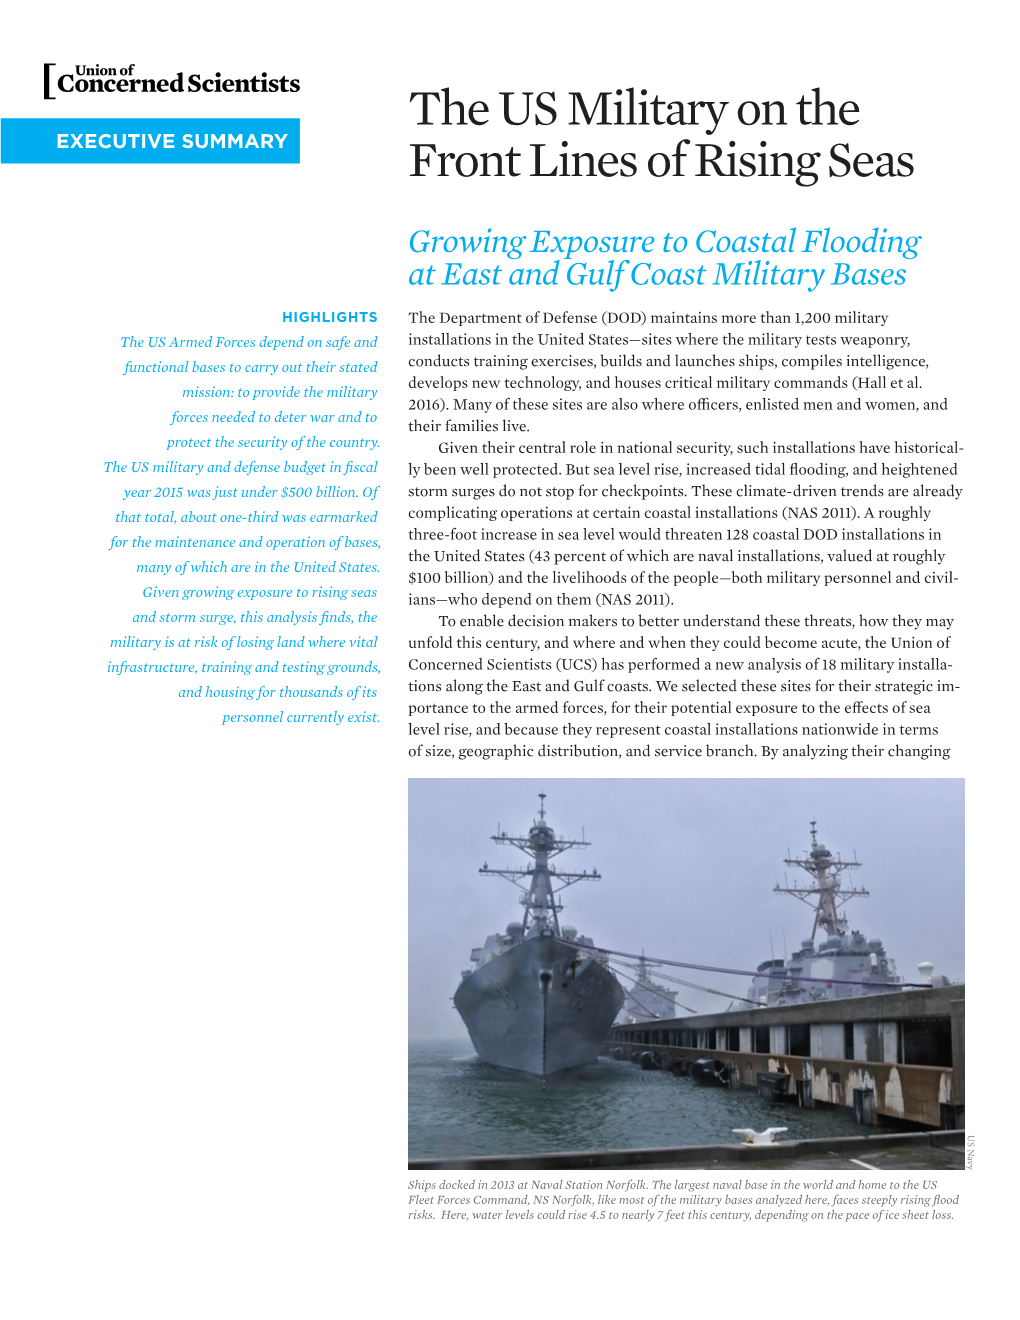 The US Military on the Front Lines of Rising Seas 3 …PLUS TIDAL FLOODING… 260 in 2050